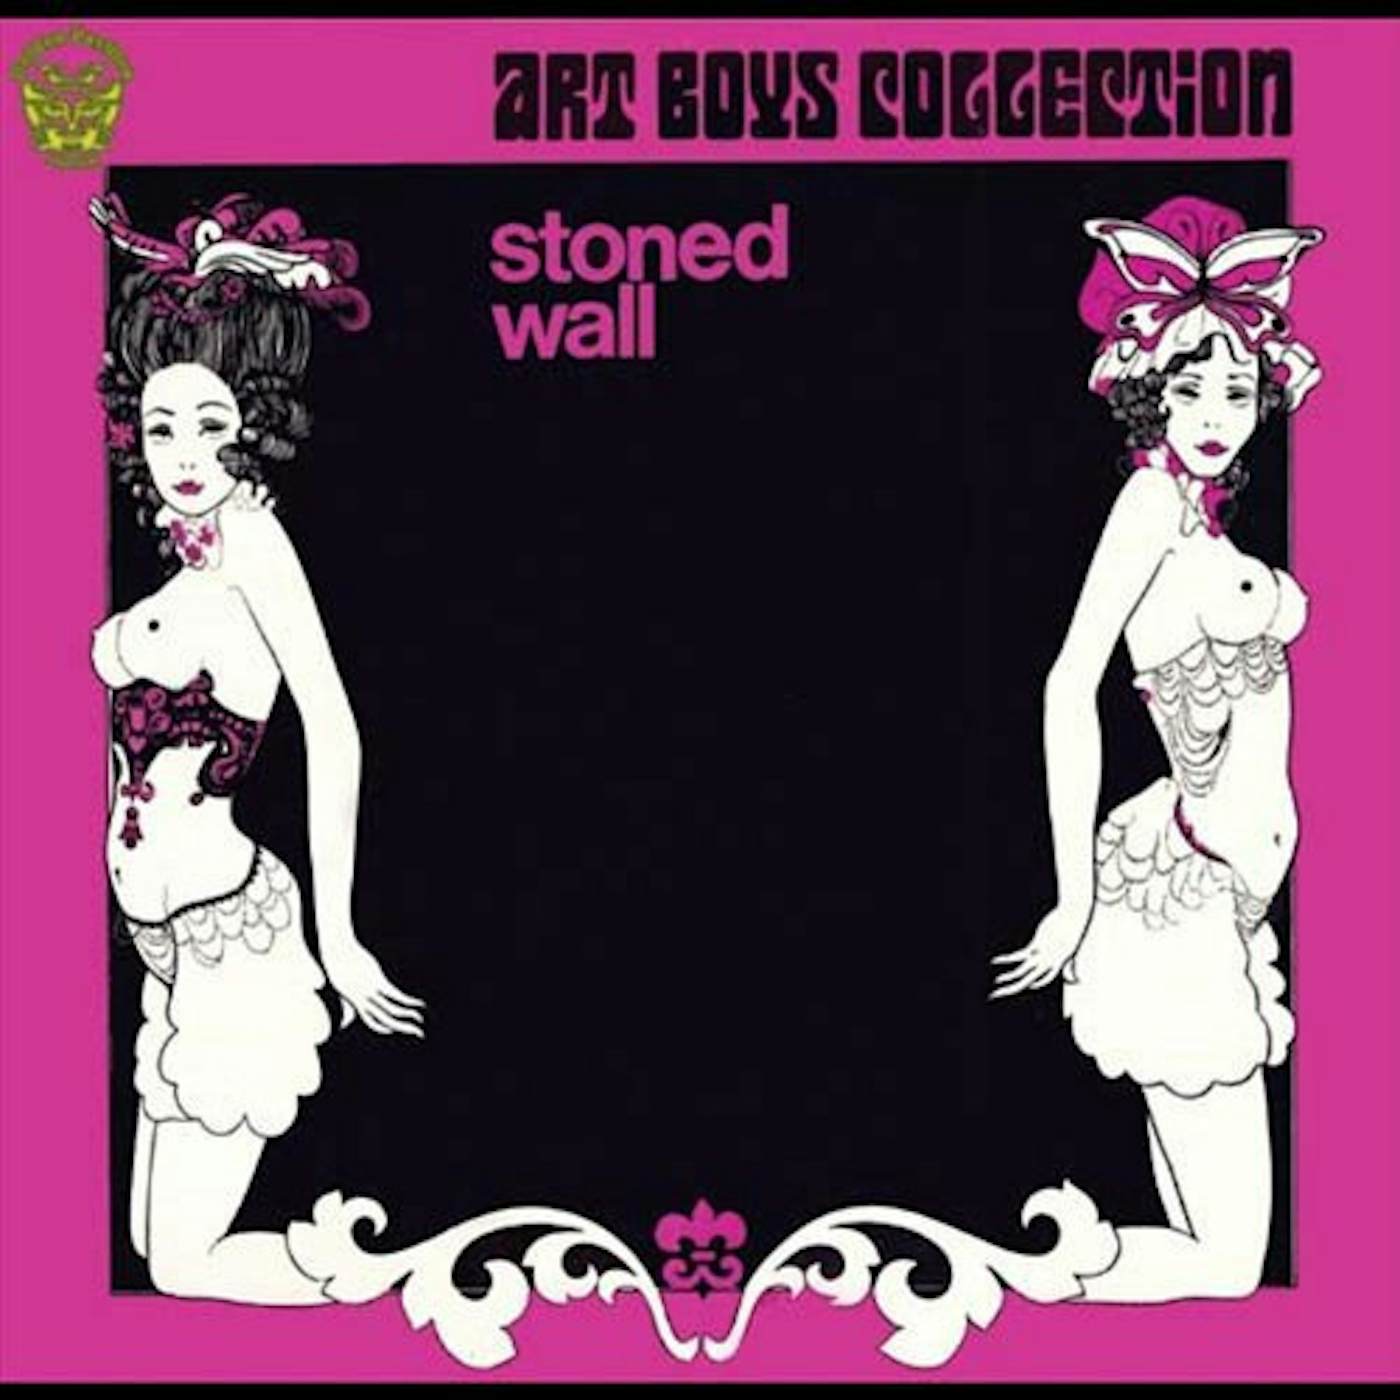 Art Boys Collection Stoned Wall Vinyl Record